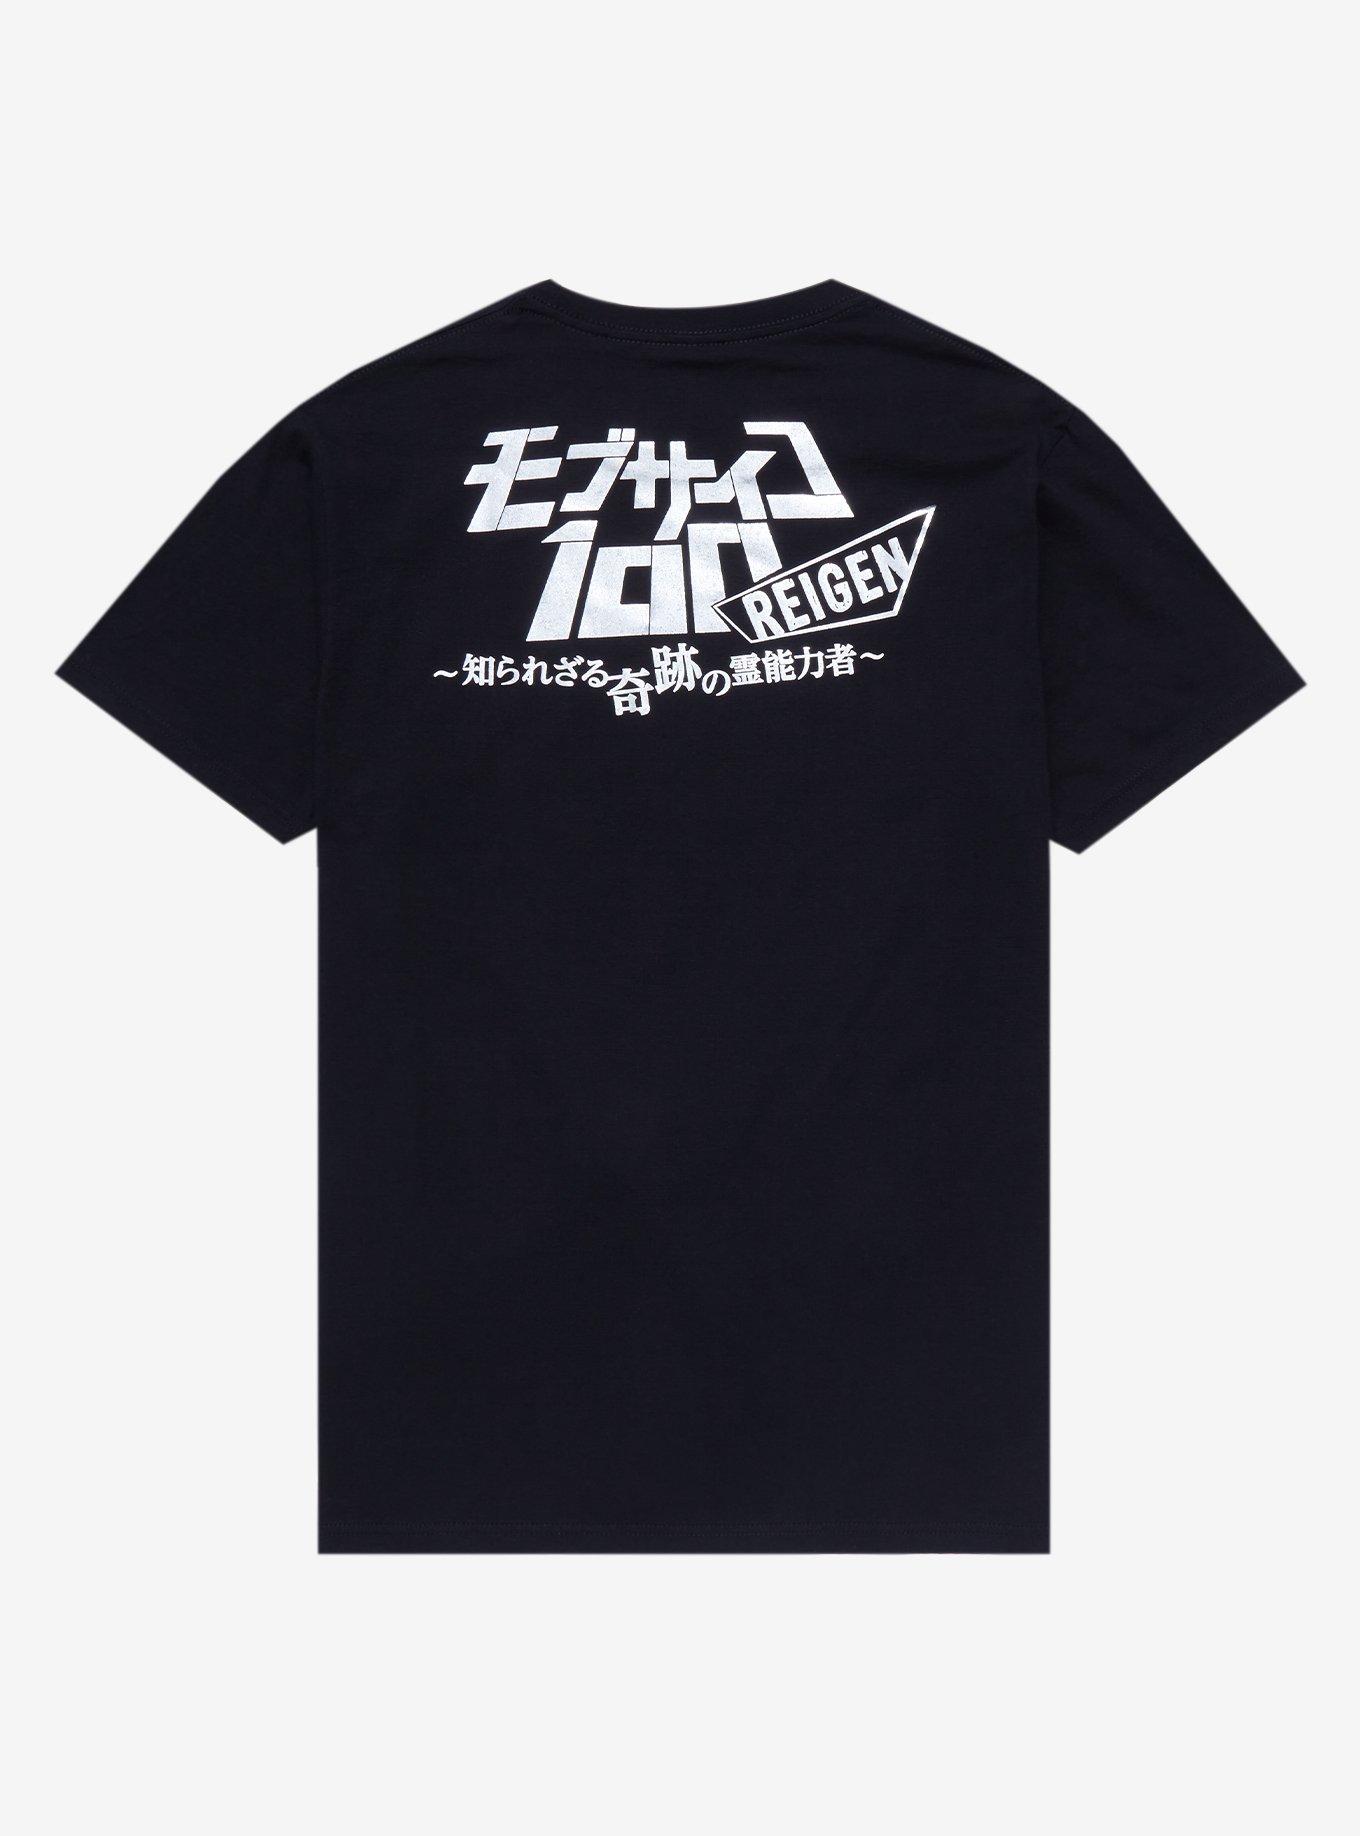 Mob Psycho 100: Reigen The Miraculous Unknown Psychic Silver Double-Sided T-Shirt, BLACK, alternate